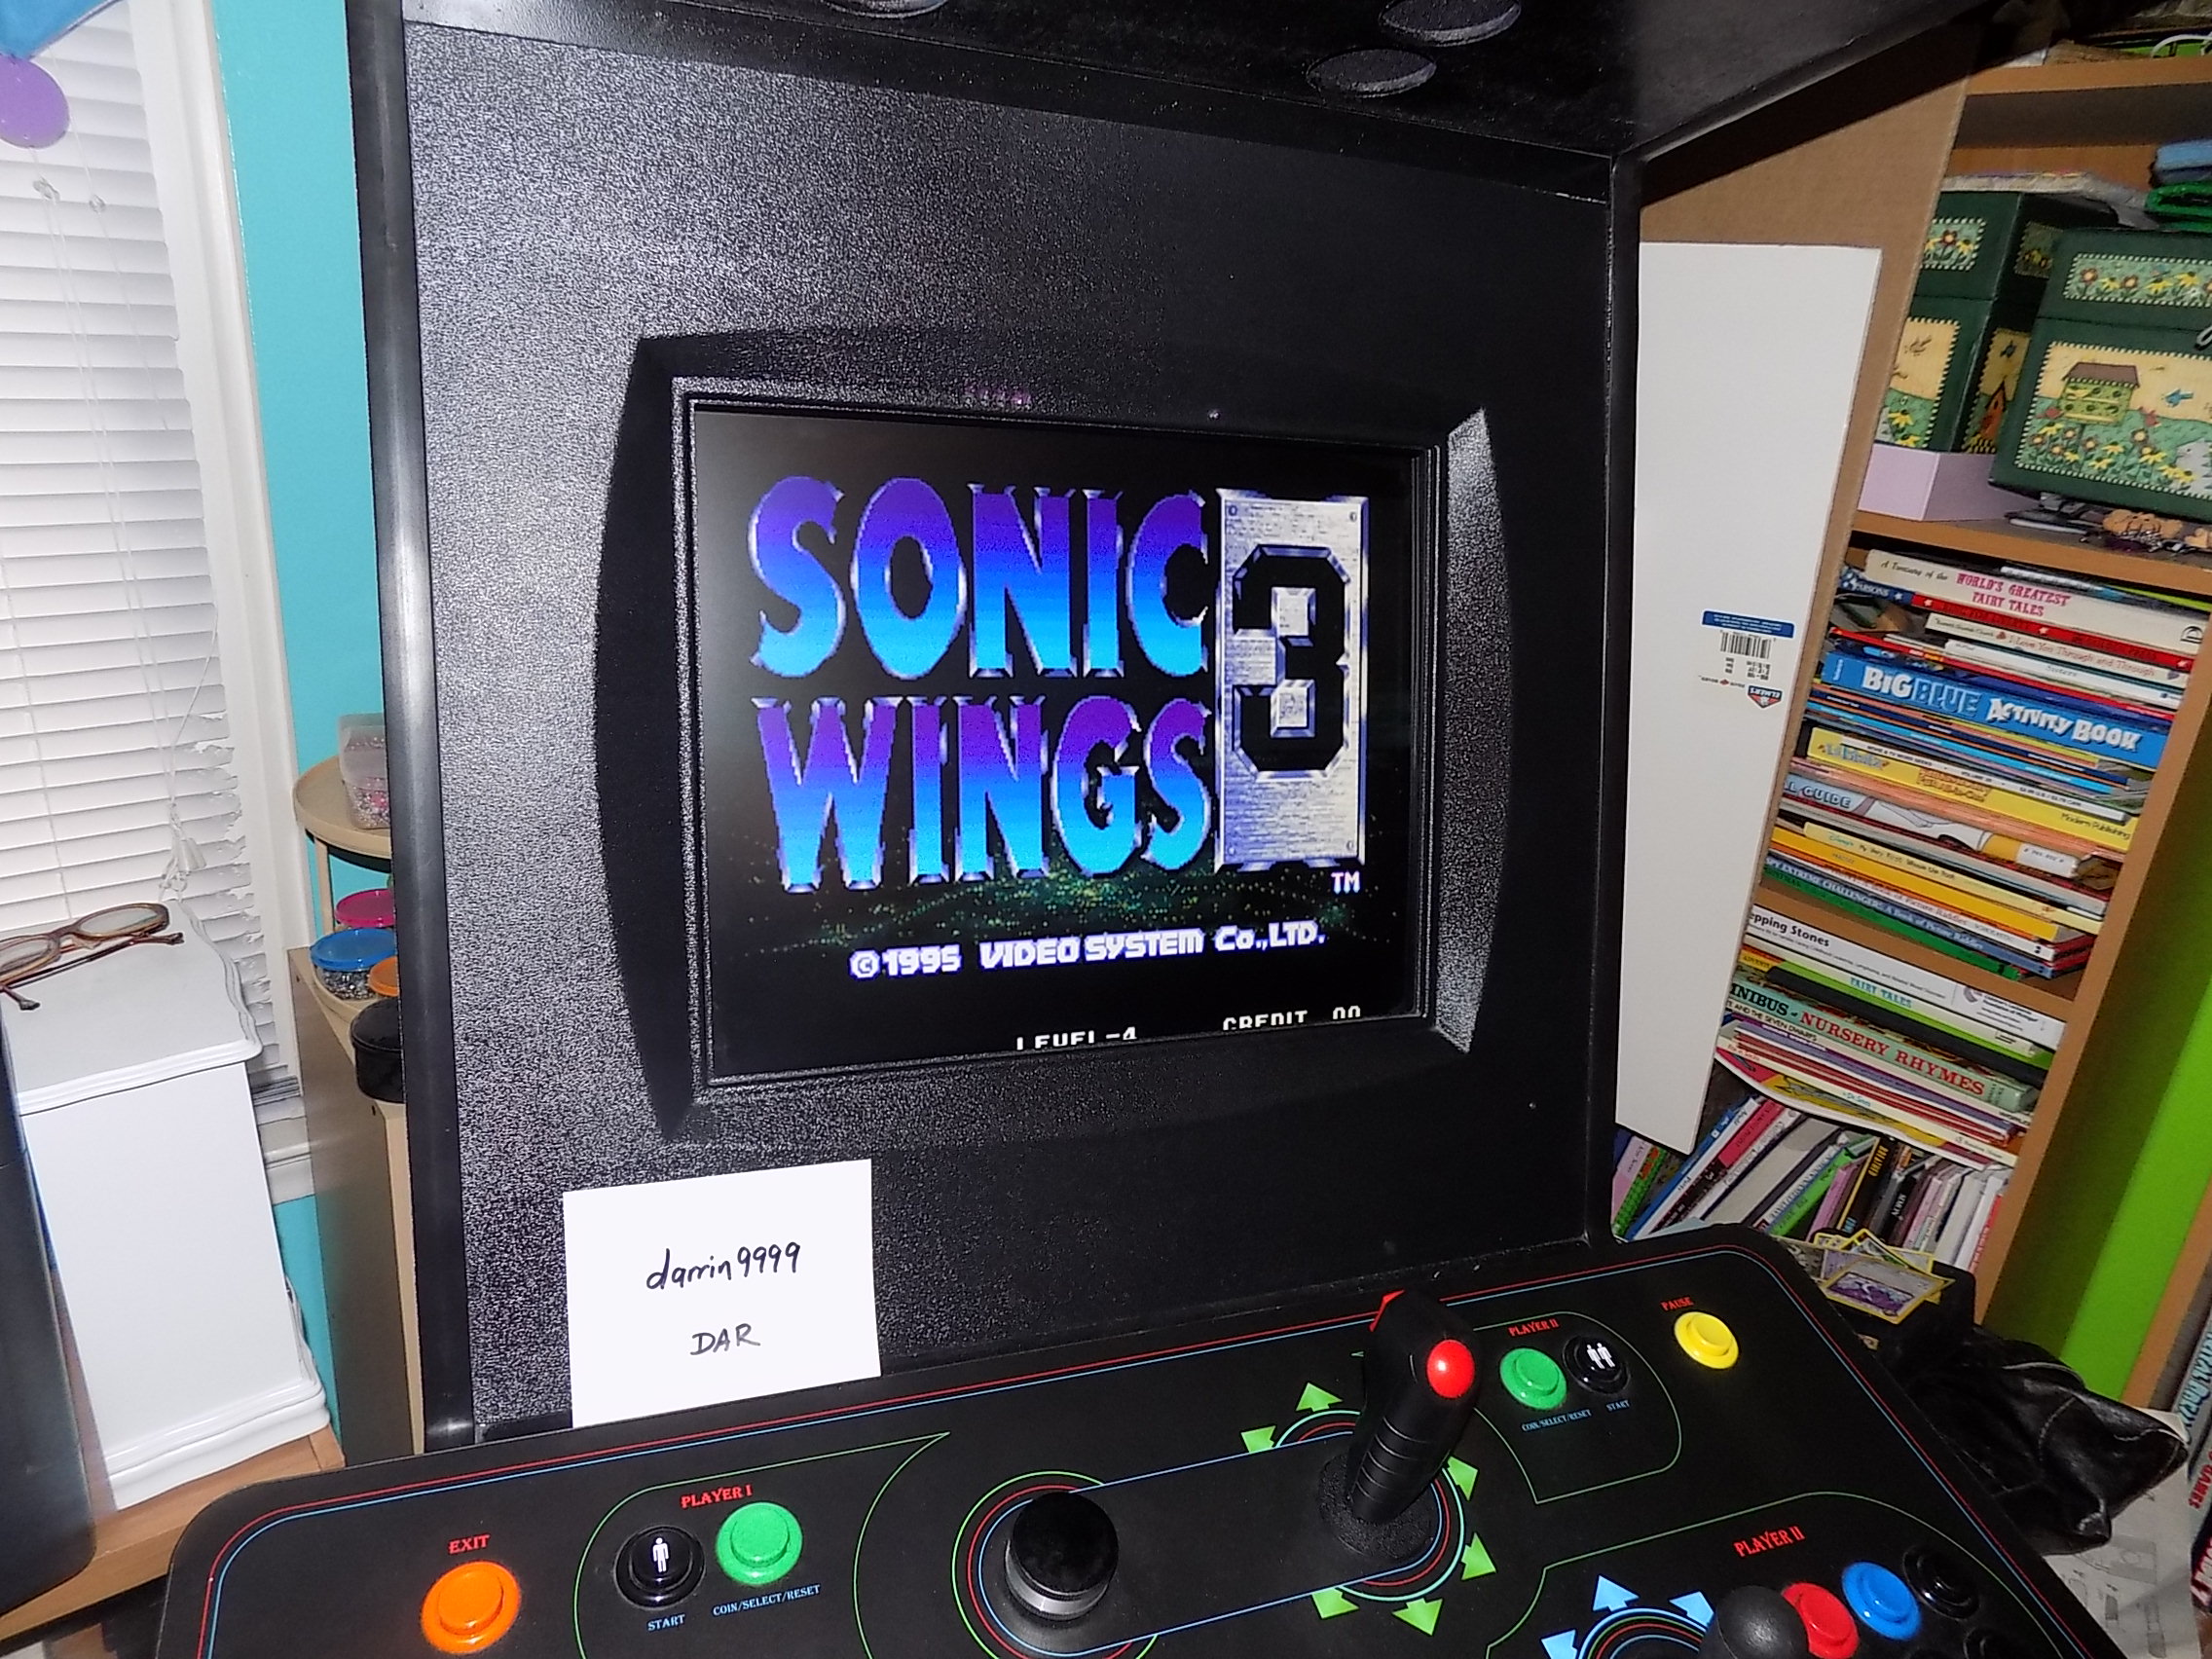 Aero Fighters 3 / Sonic Wings 3  [Arcade] [sonicwi3] 109,900 points